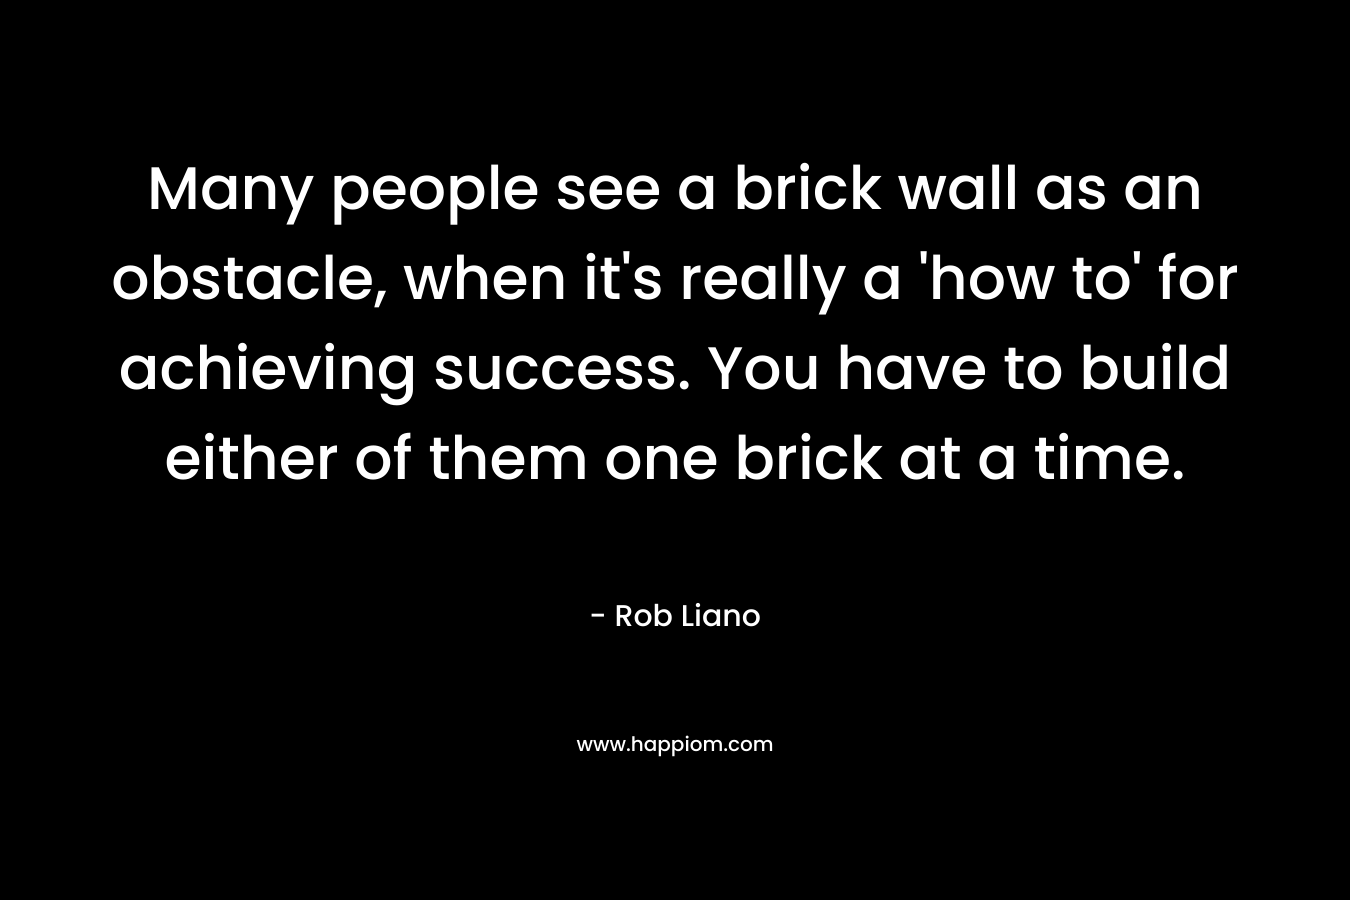 Many people see a brick wall as an obstacle, when it’s really a ‘how to’ for achieving success. You have to build either of them one brick at a time. – Rob Liano